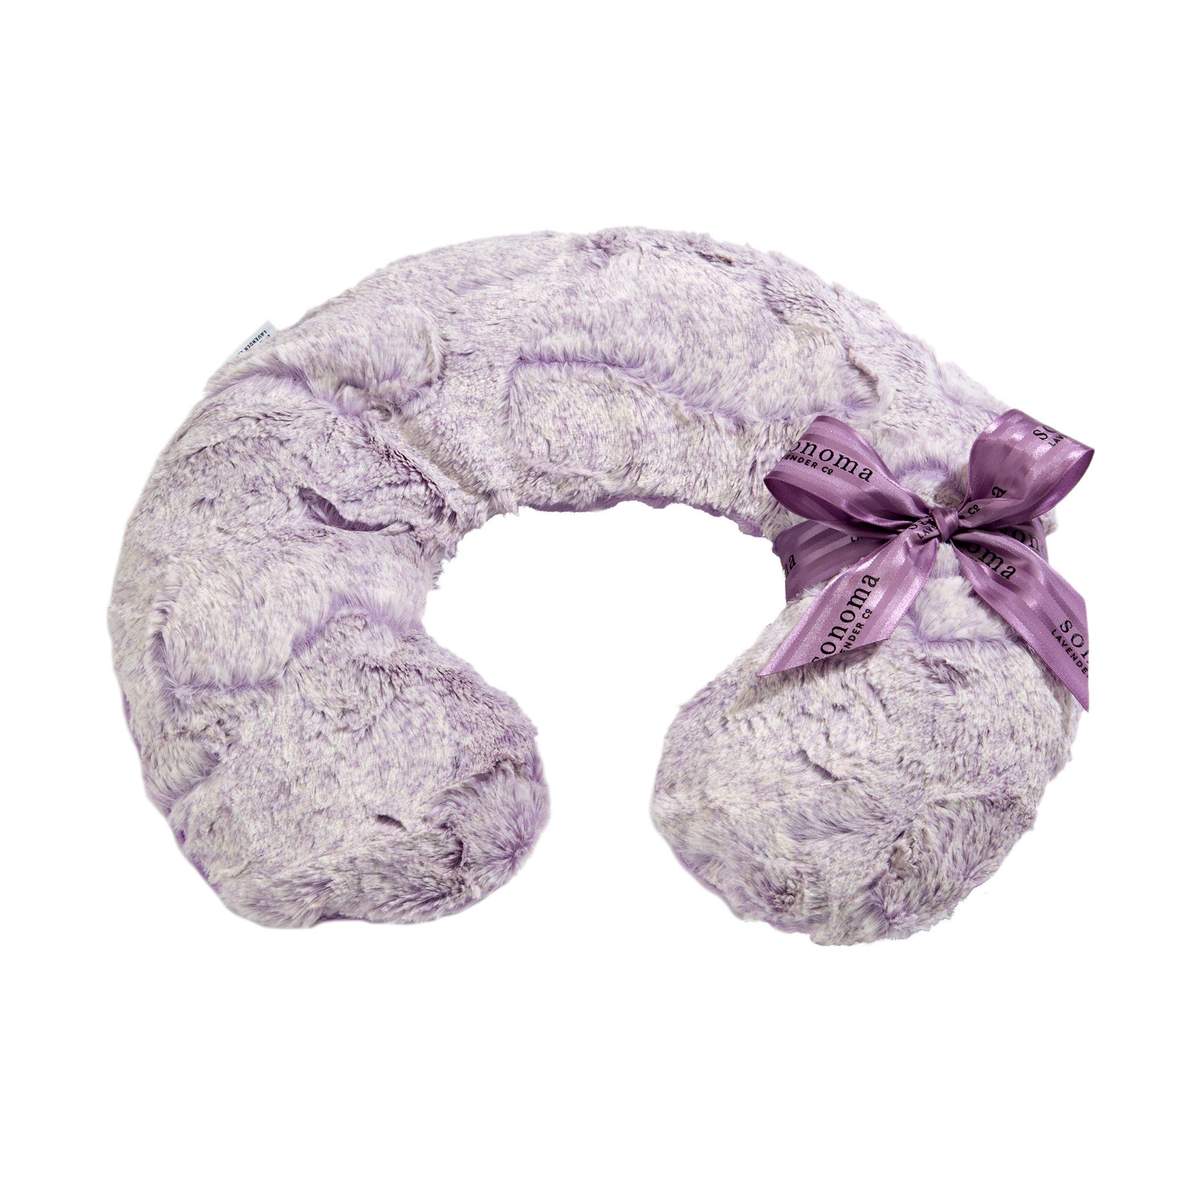 Neck Pillow Aster Heather Lavender